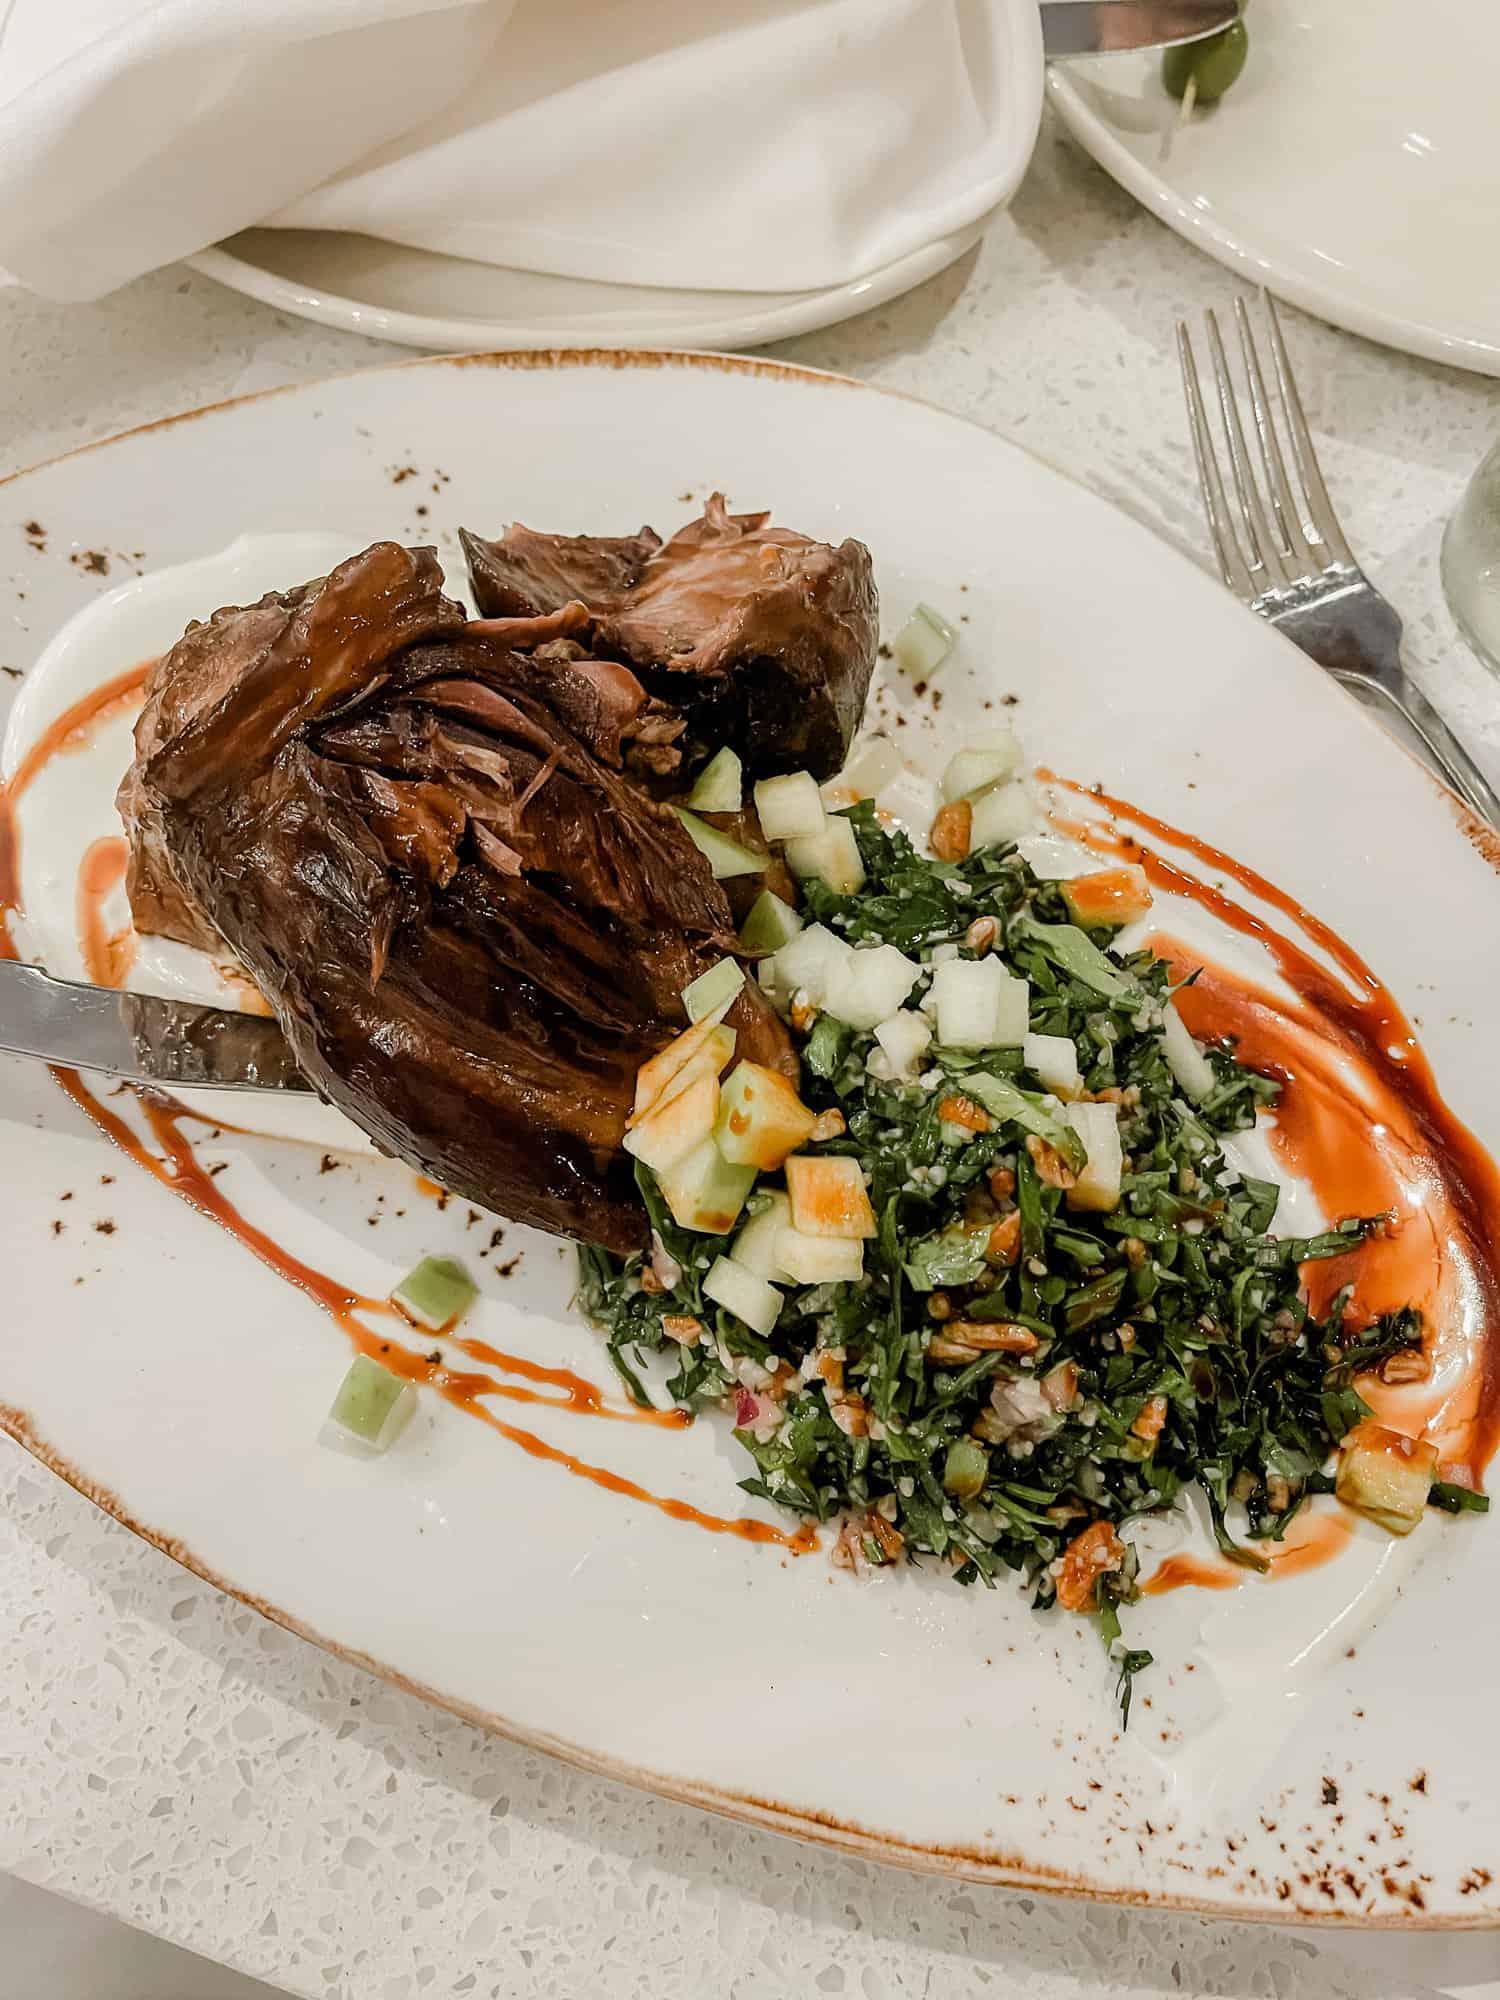 steak with tabbouleh salad on a white plate with an orange and red sauce around the edges